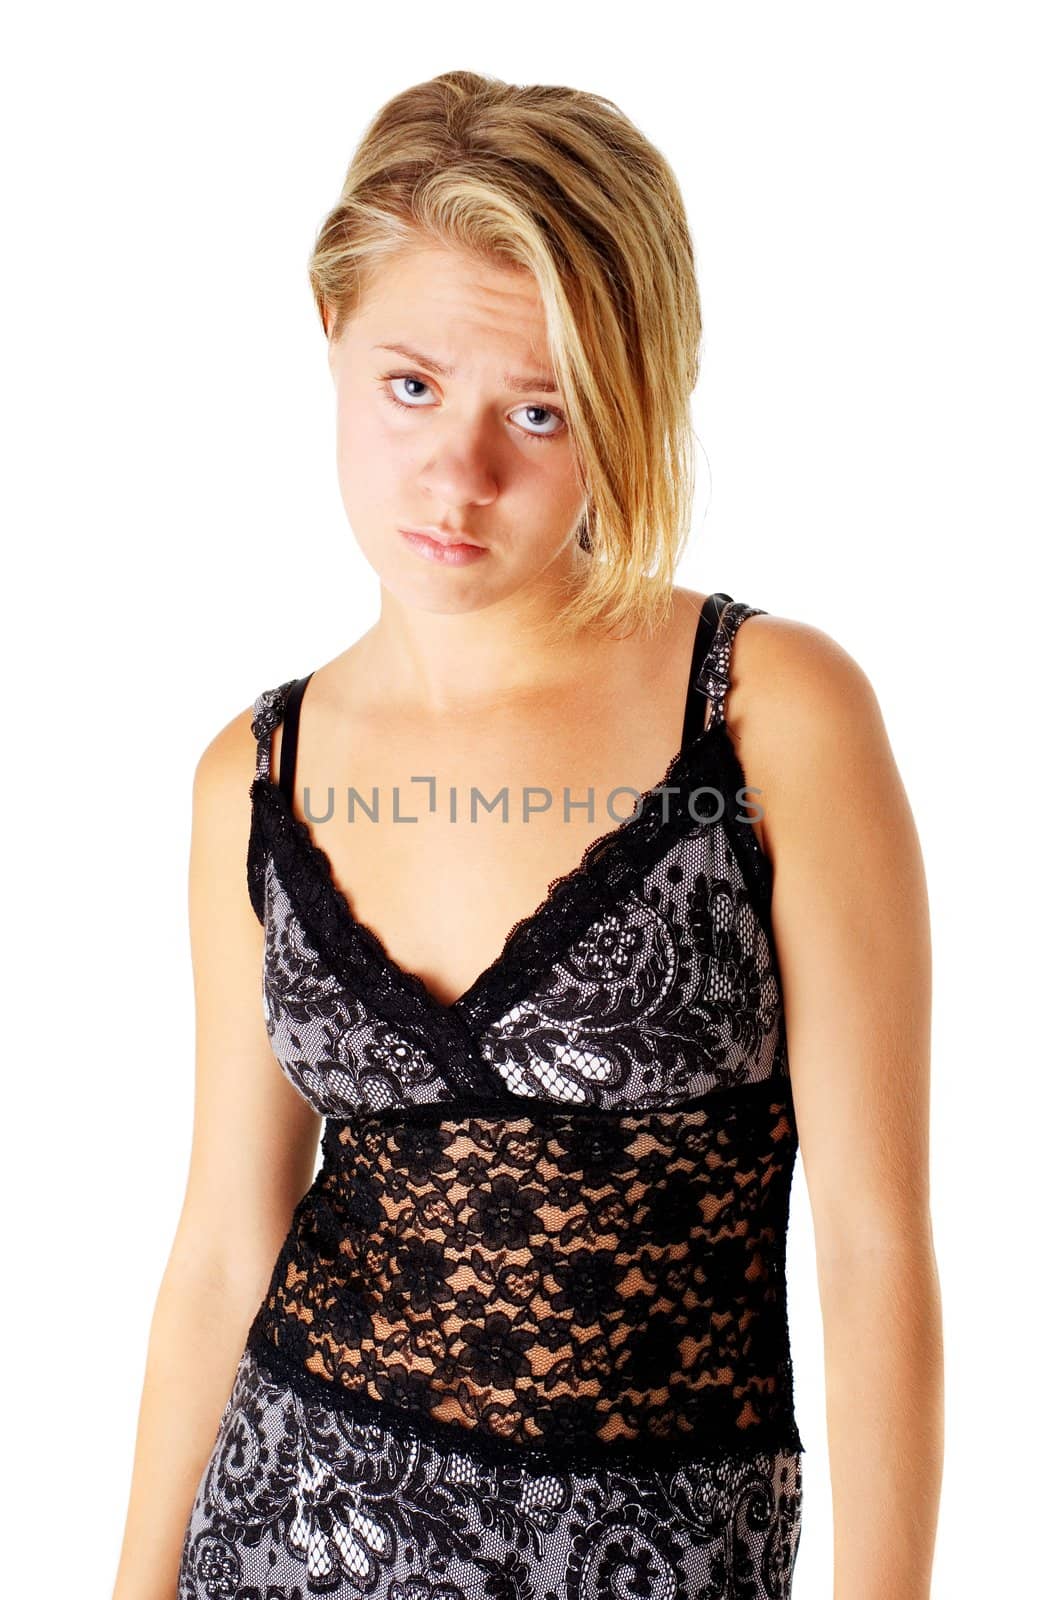 Sad girl in a dress, against a white background.